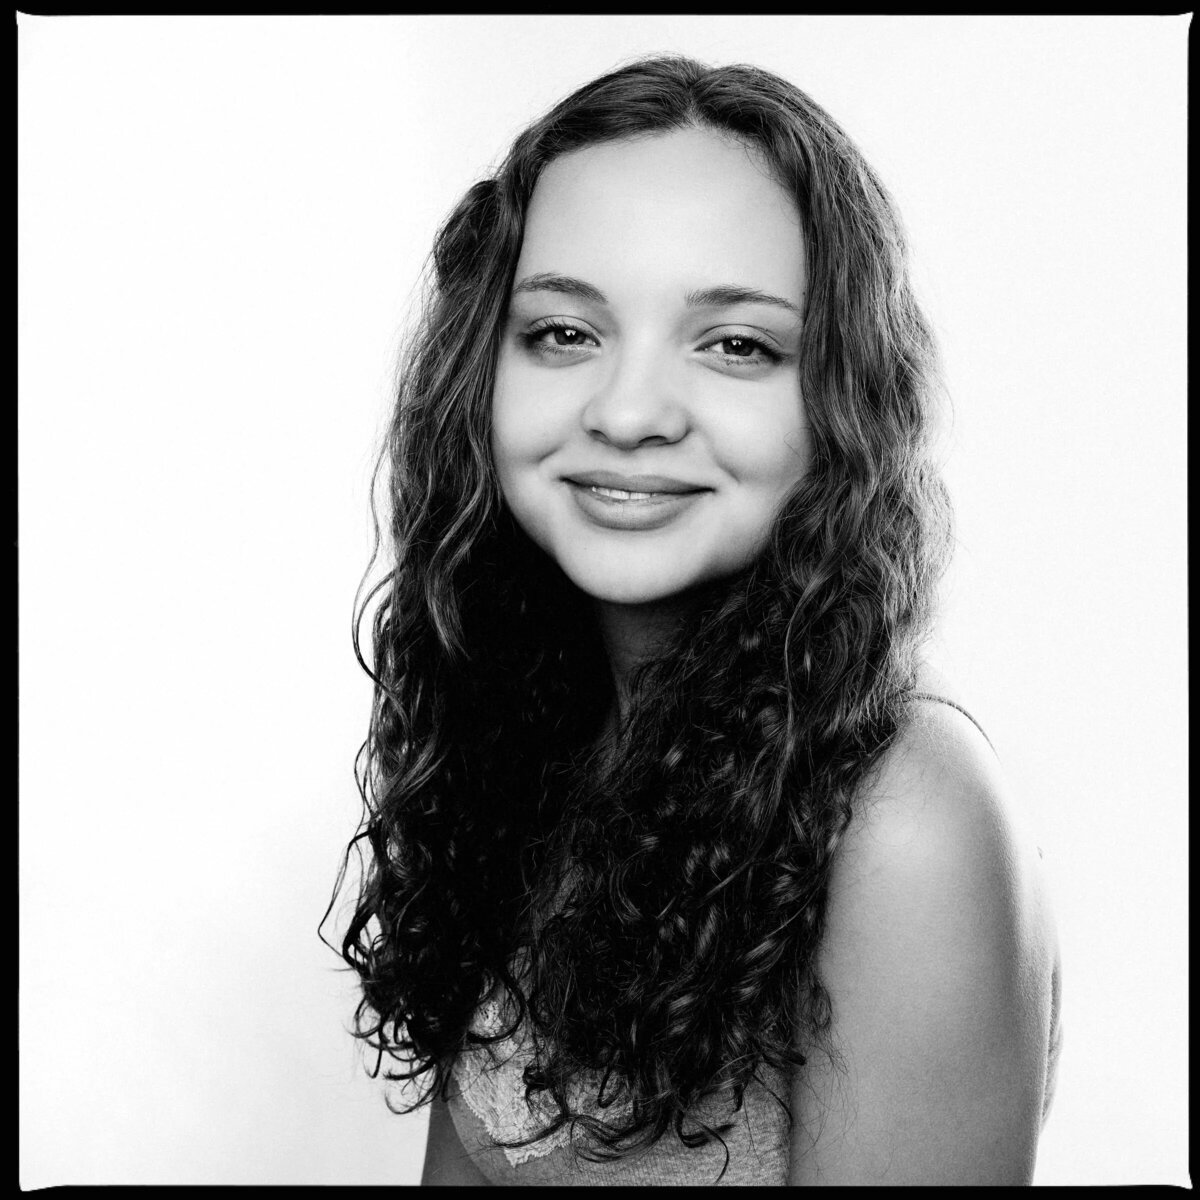 Black and white photo of a teenage girl smiling.